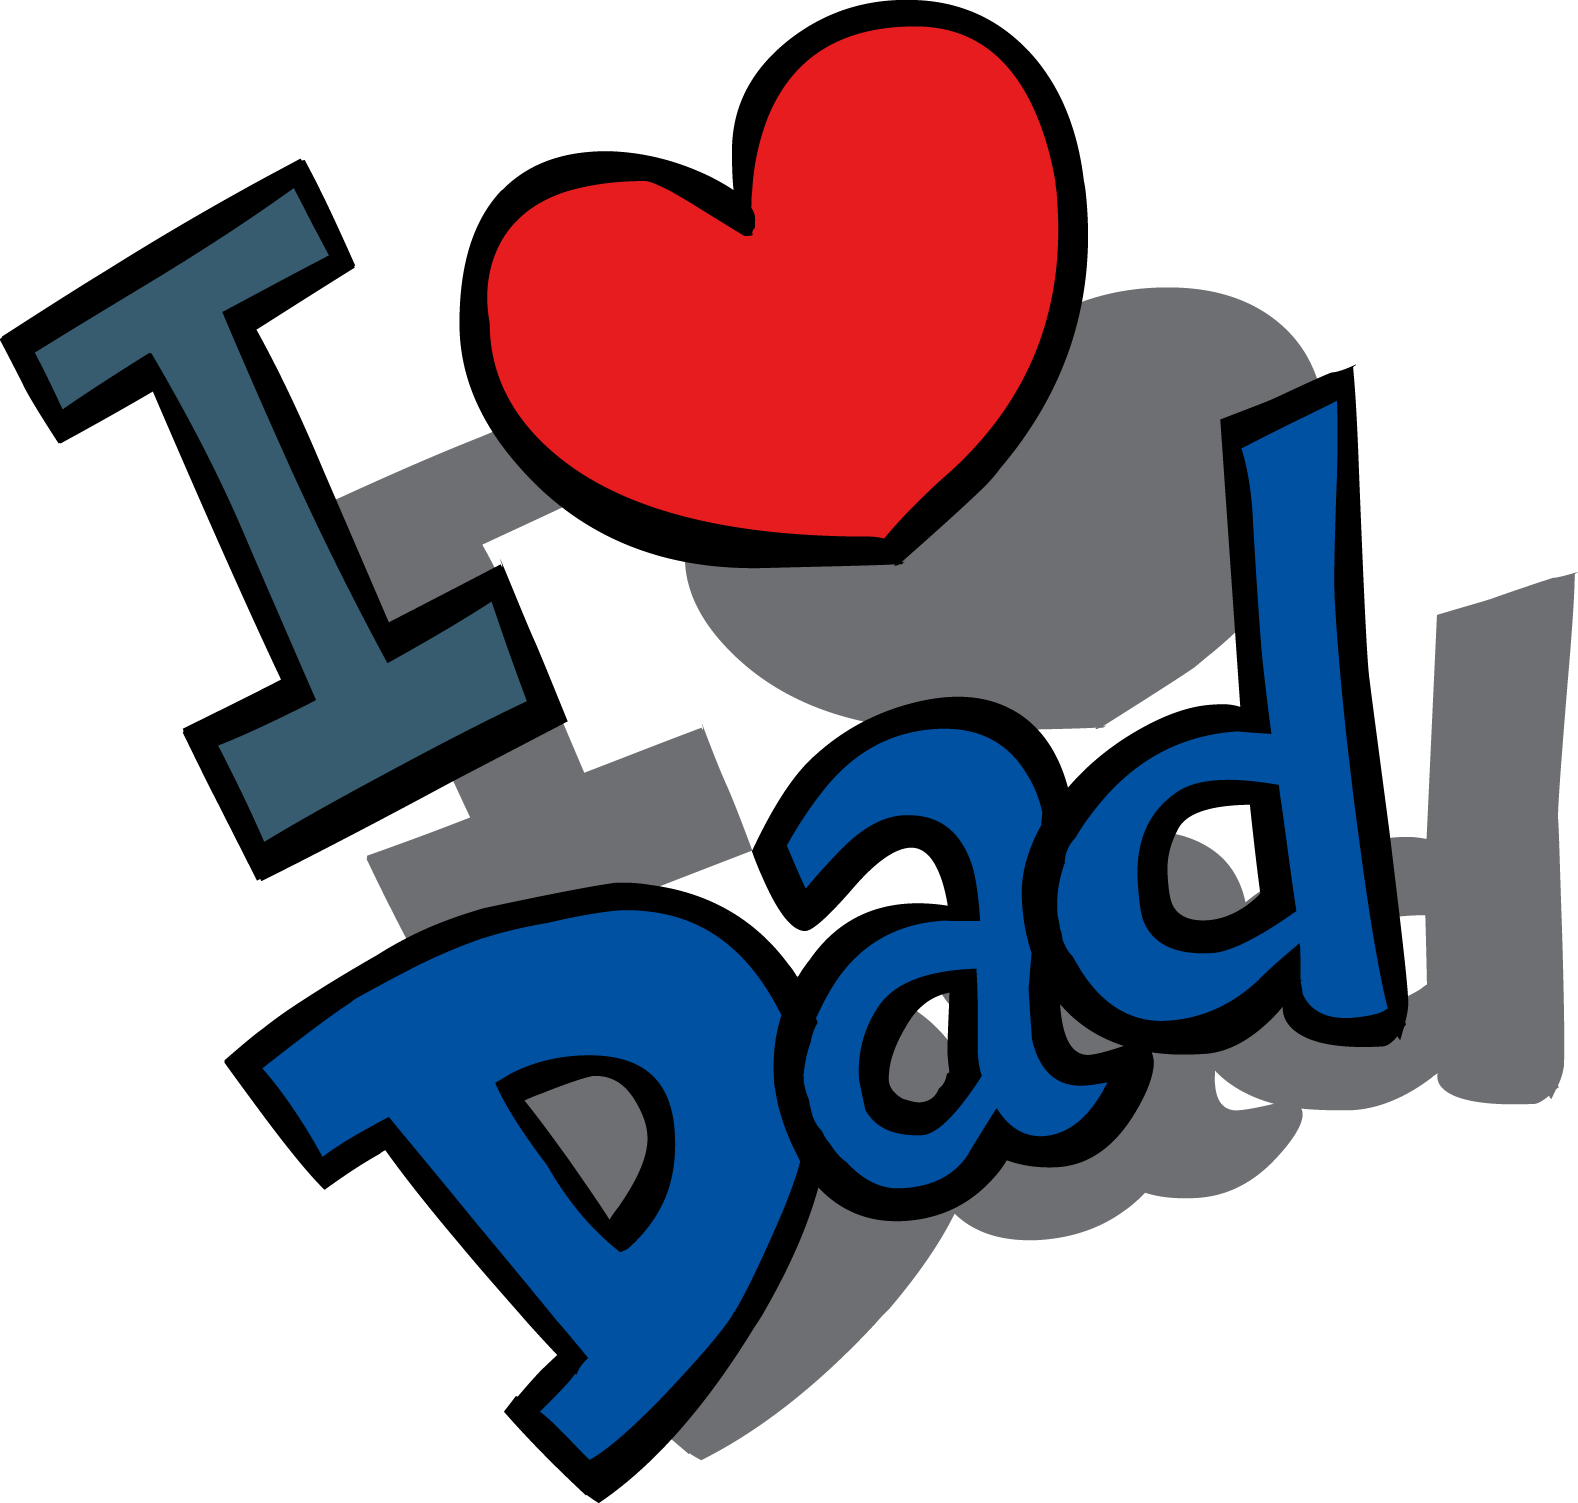 Fathers day free clip art father day clipart image